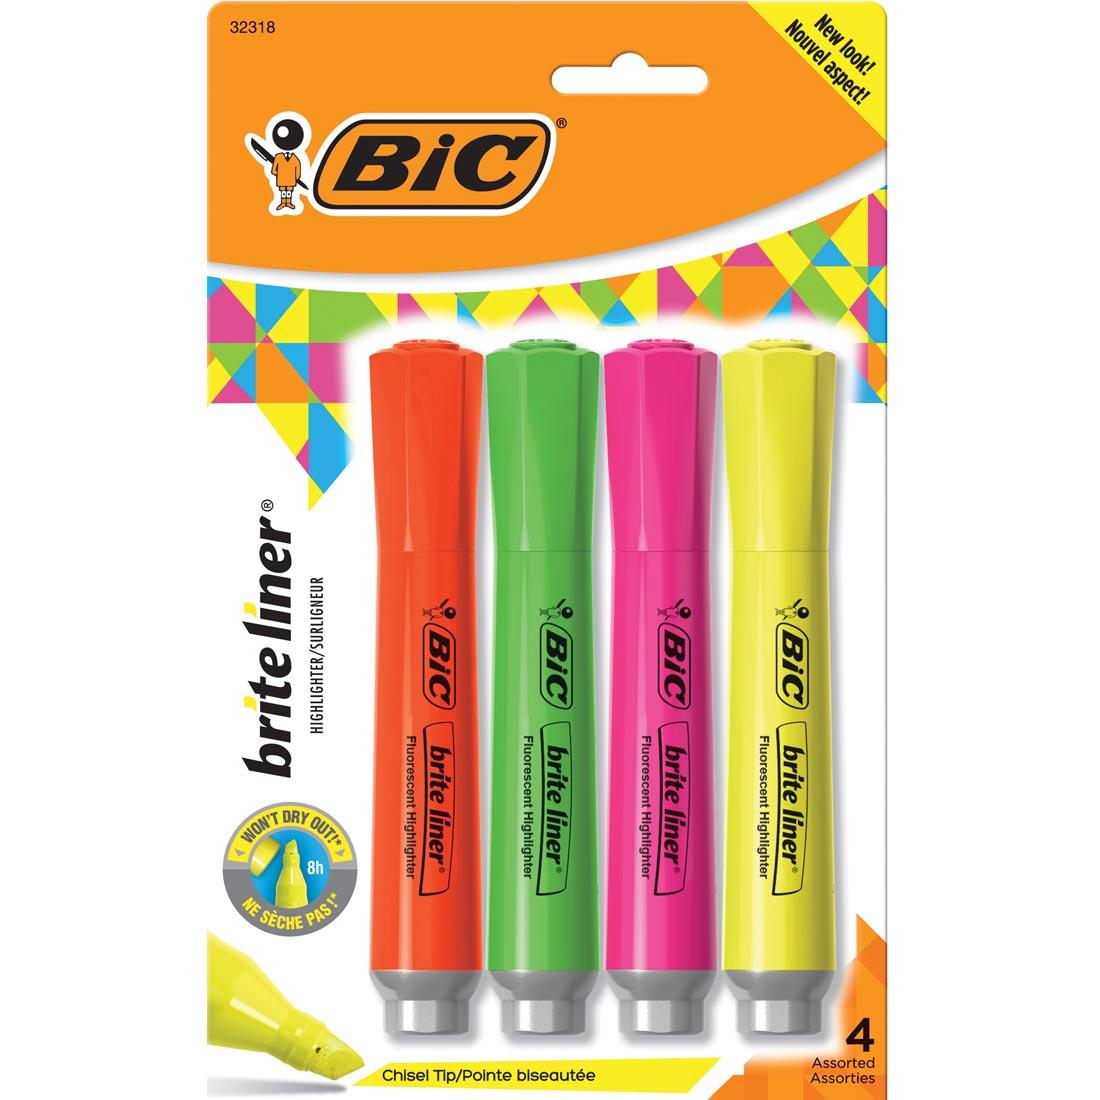 BiC Brite Liner Highlighters in orange, green, pink and yellow